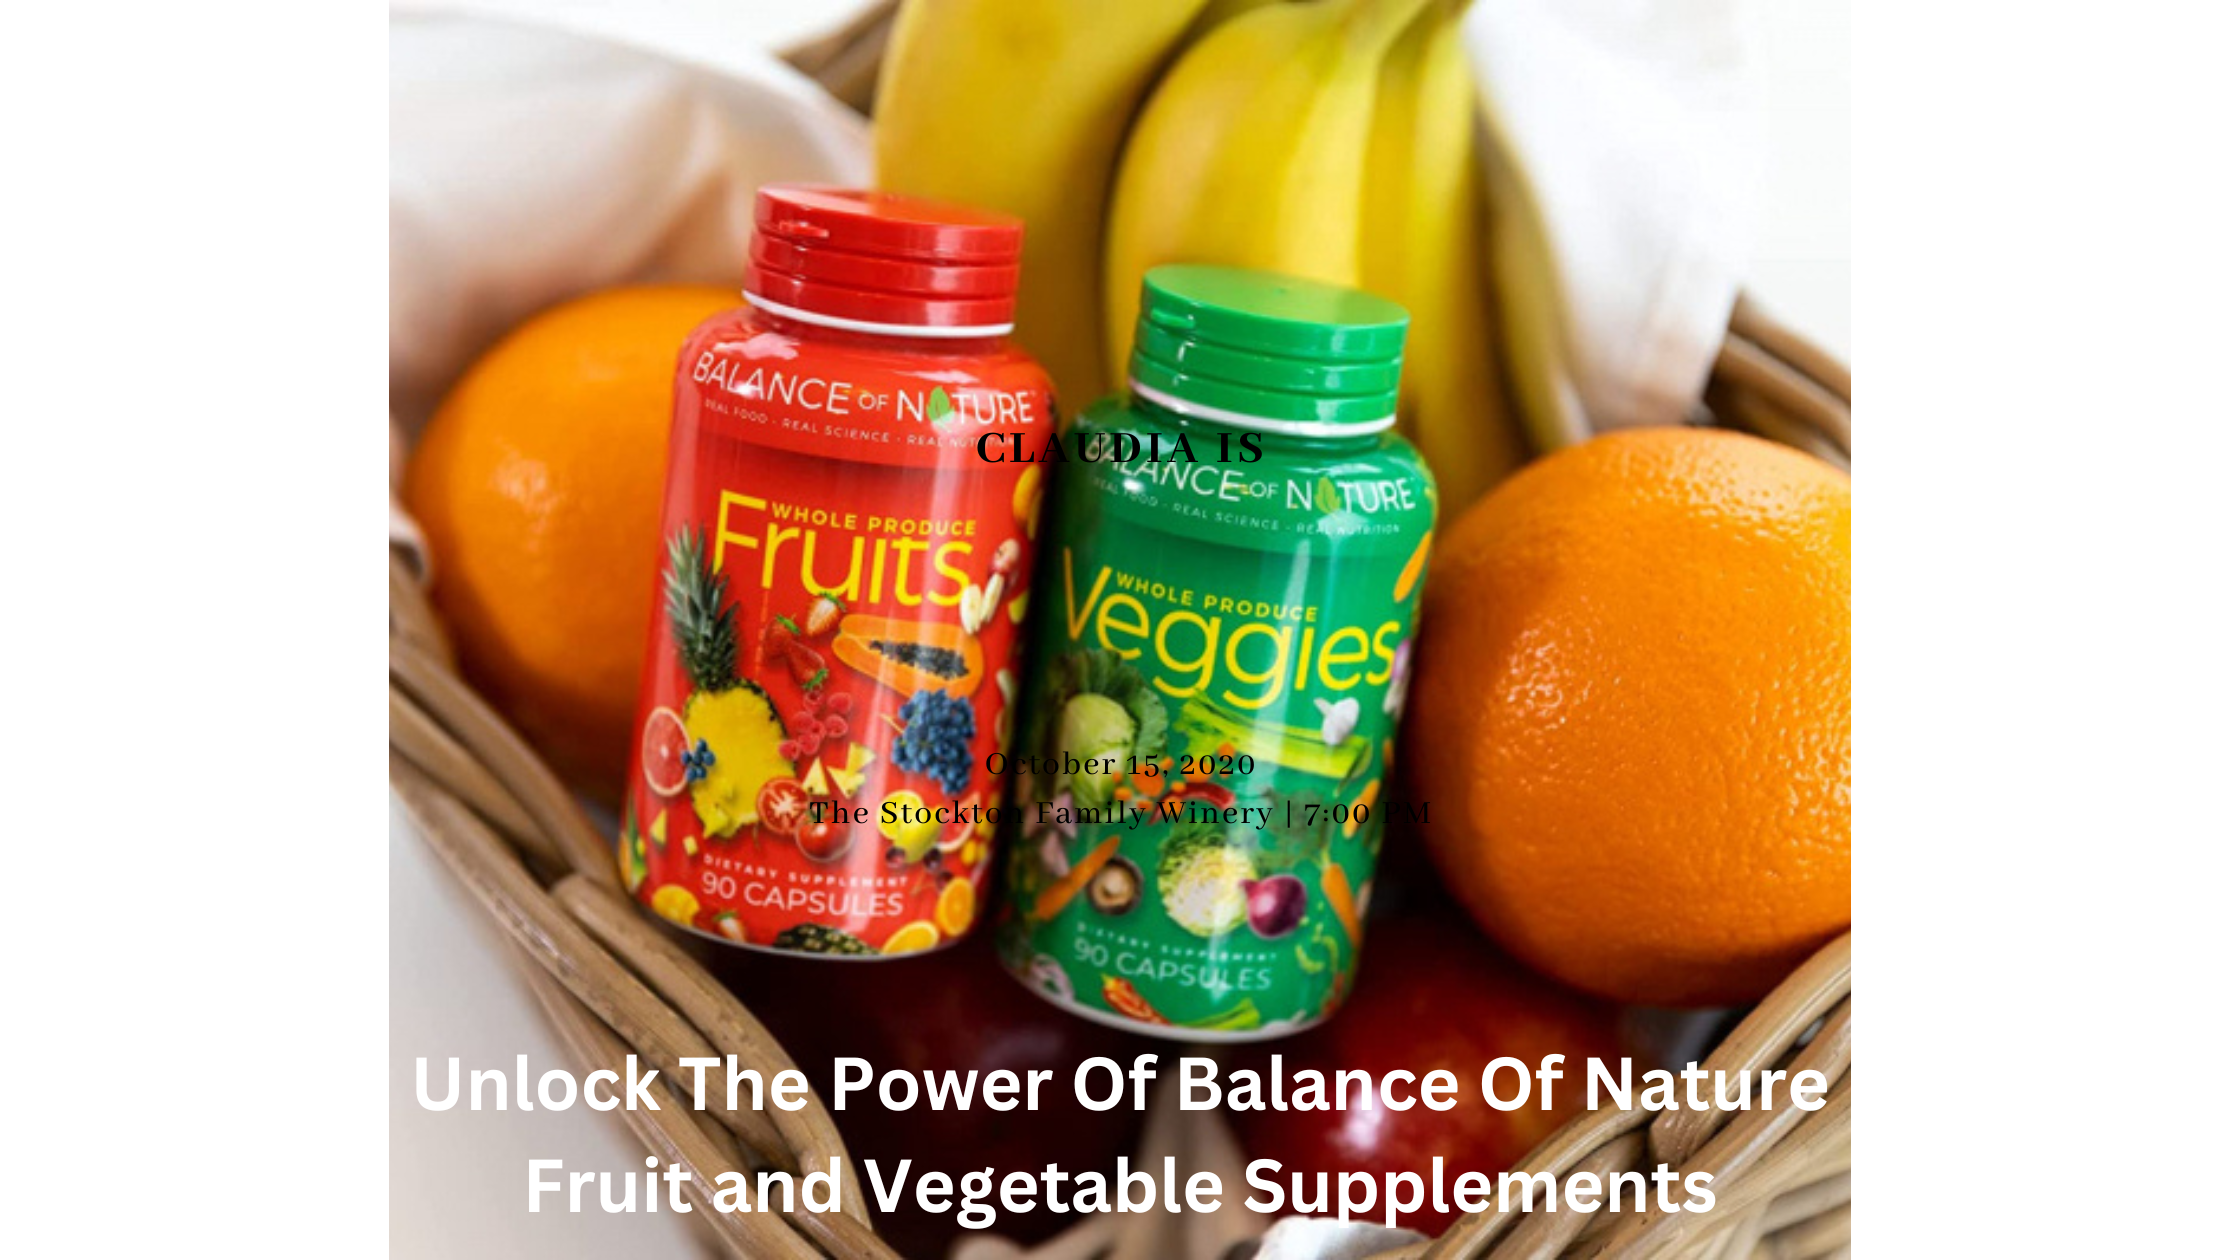 Balance Of Nature Fruit and Vegetable Supplements